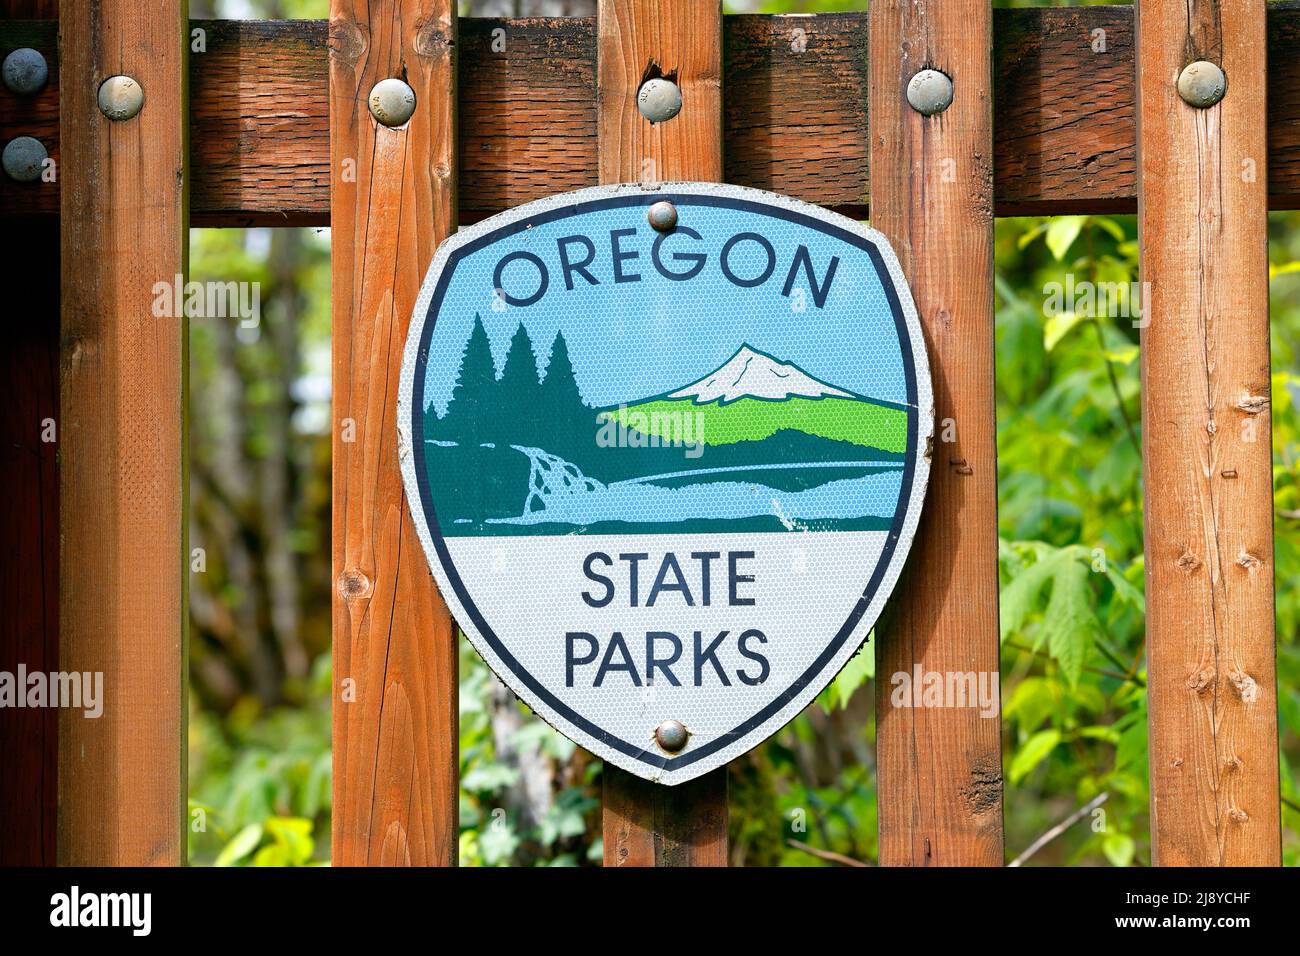 Oregon State Parks signage at a state park in Oregon state. The logo features Mount Hood, waterfalls and forests. Stock Photo